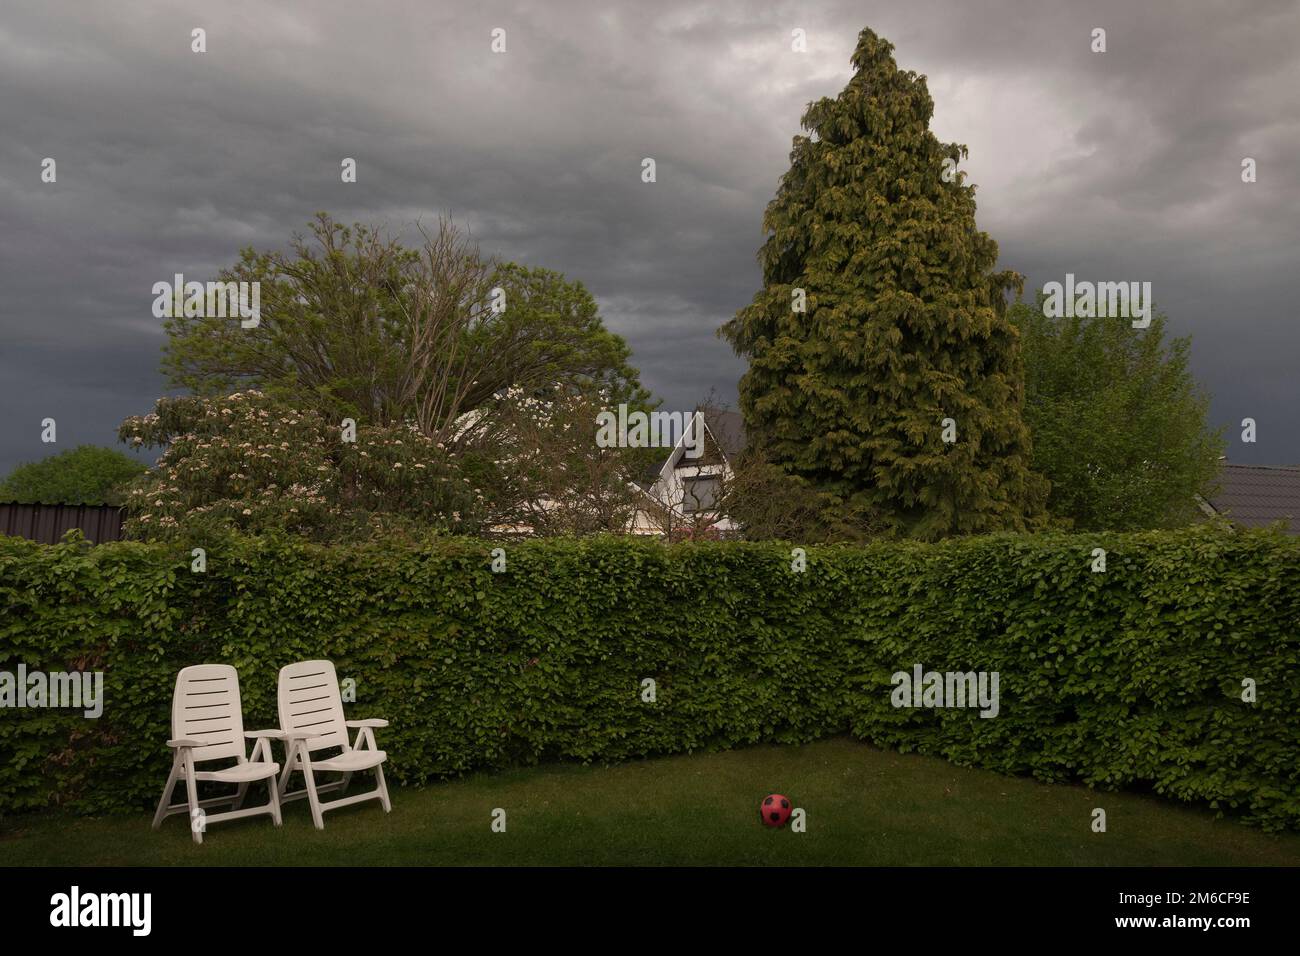 Before the rain, empty chairs and a red ball. Yard landscape in bad weather.  cloudy sky Stock Photo